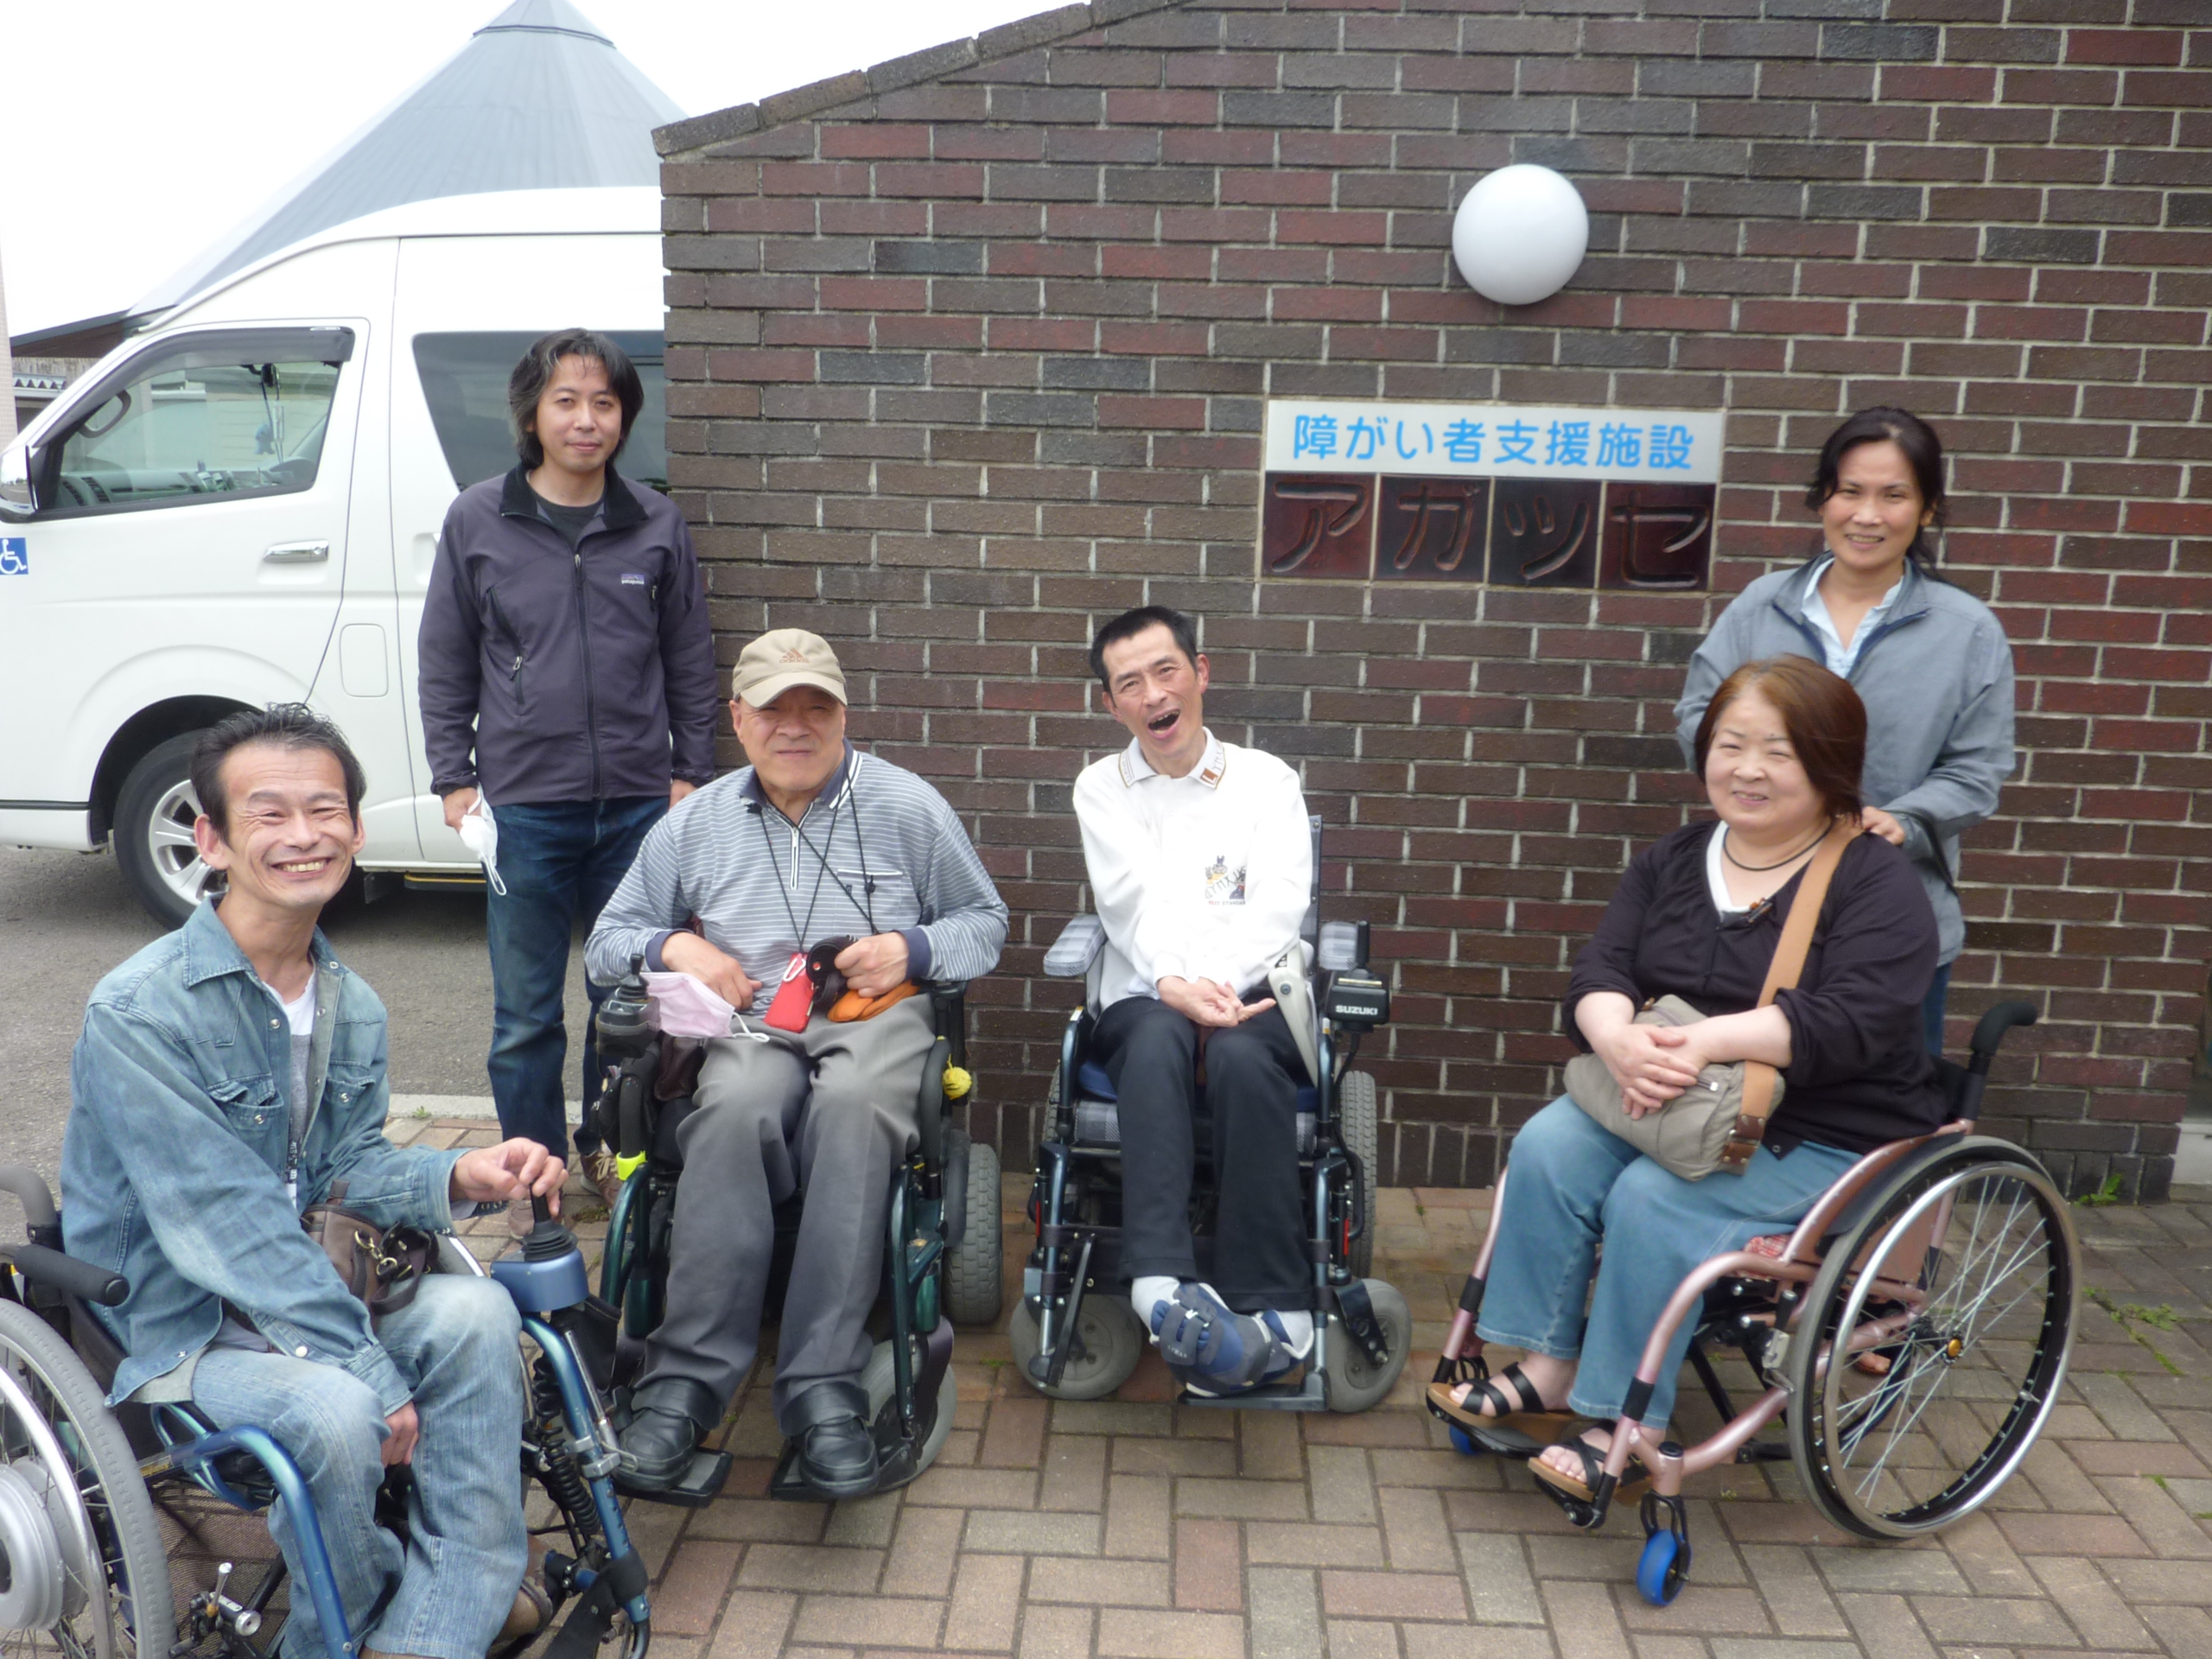 Visiting support facilities for persons with disabilities.